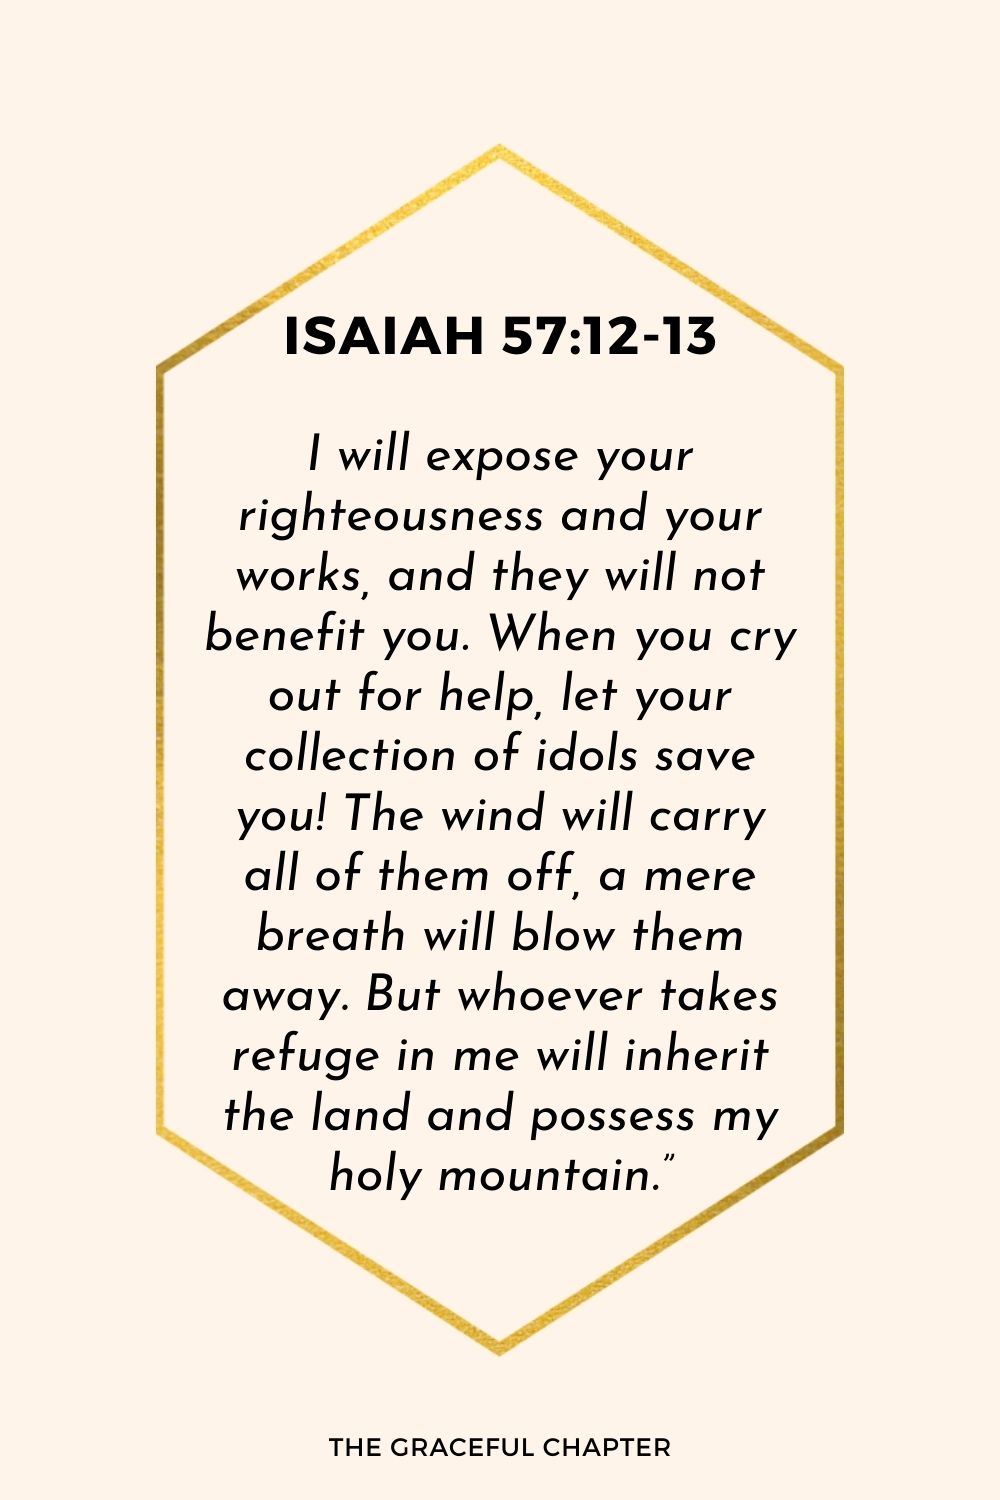 I will expose your righteousness and your works, and they will not benefit you. When you cry out for help, let your collection of idols save you! The wind will carry all of them off, a mere breath will blow them away. But whoever takes refuge in me will inherit the land and possess my holy mountain.”